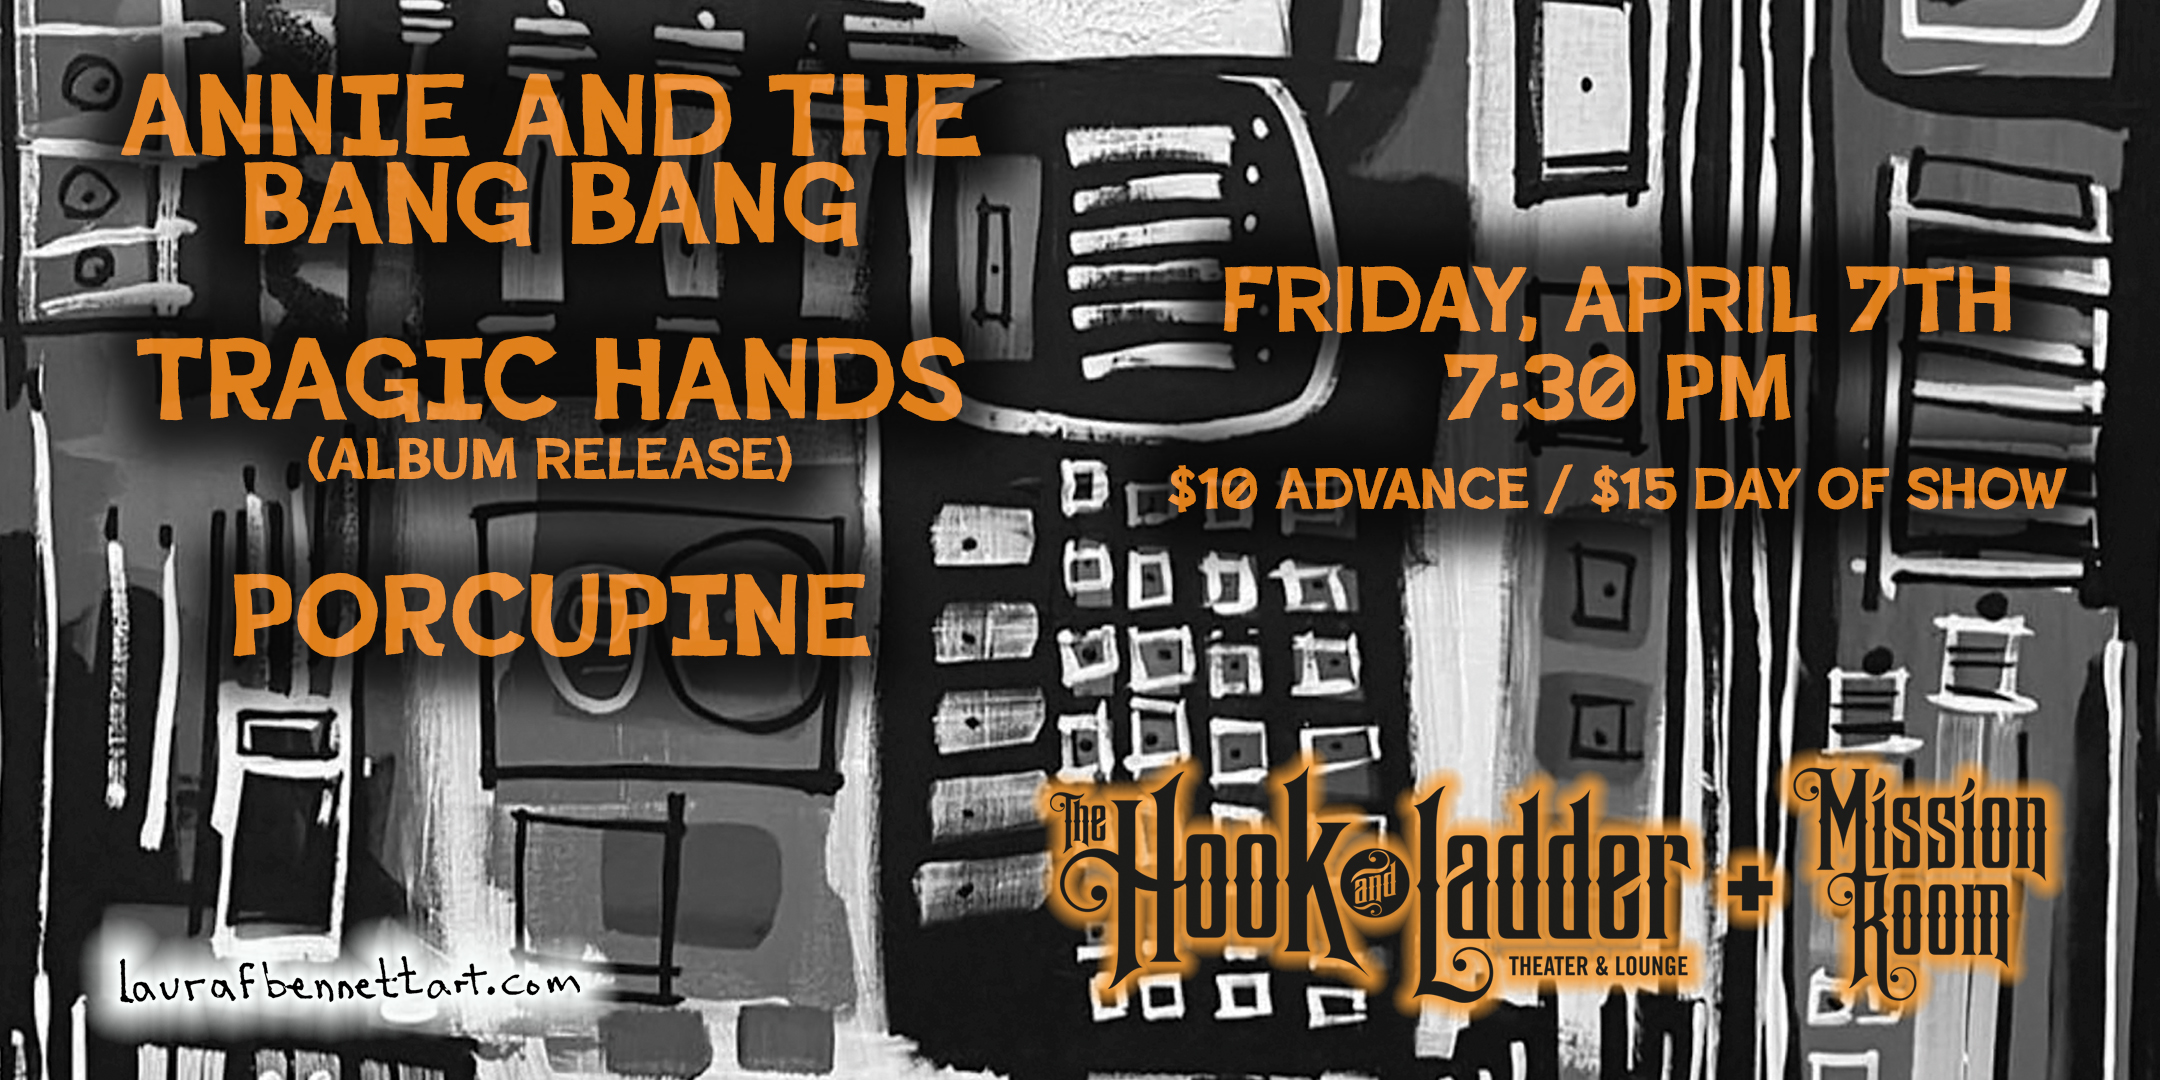 Annie And The Bang Bang Tragic Hands (Album Release) Porcupine Friday April 7 The Mission Room at The Hook and Ladder Theater Doors 7:30pm :: Music 8:00pm :: 21+ General Admission $10 ADV / $15 DOS NO REFUNDS